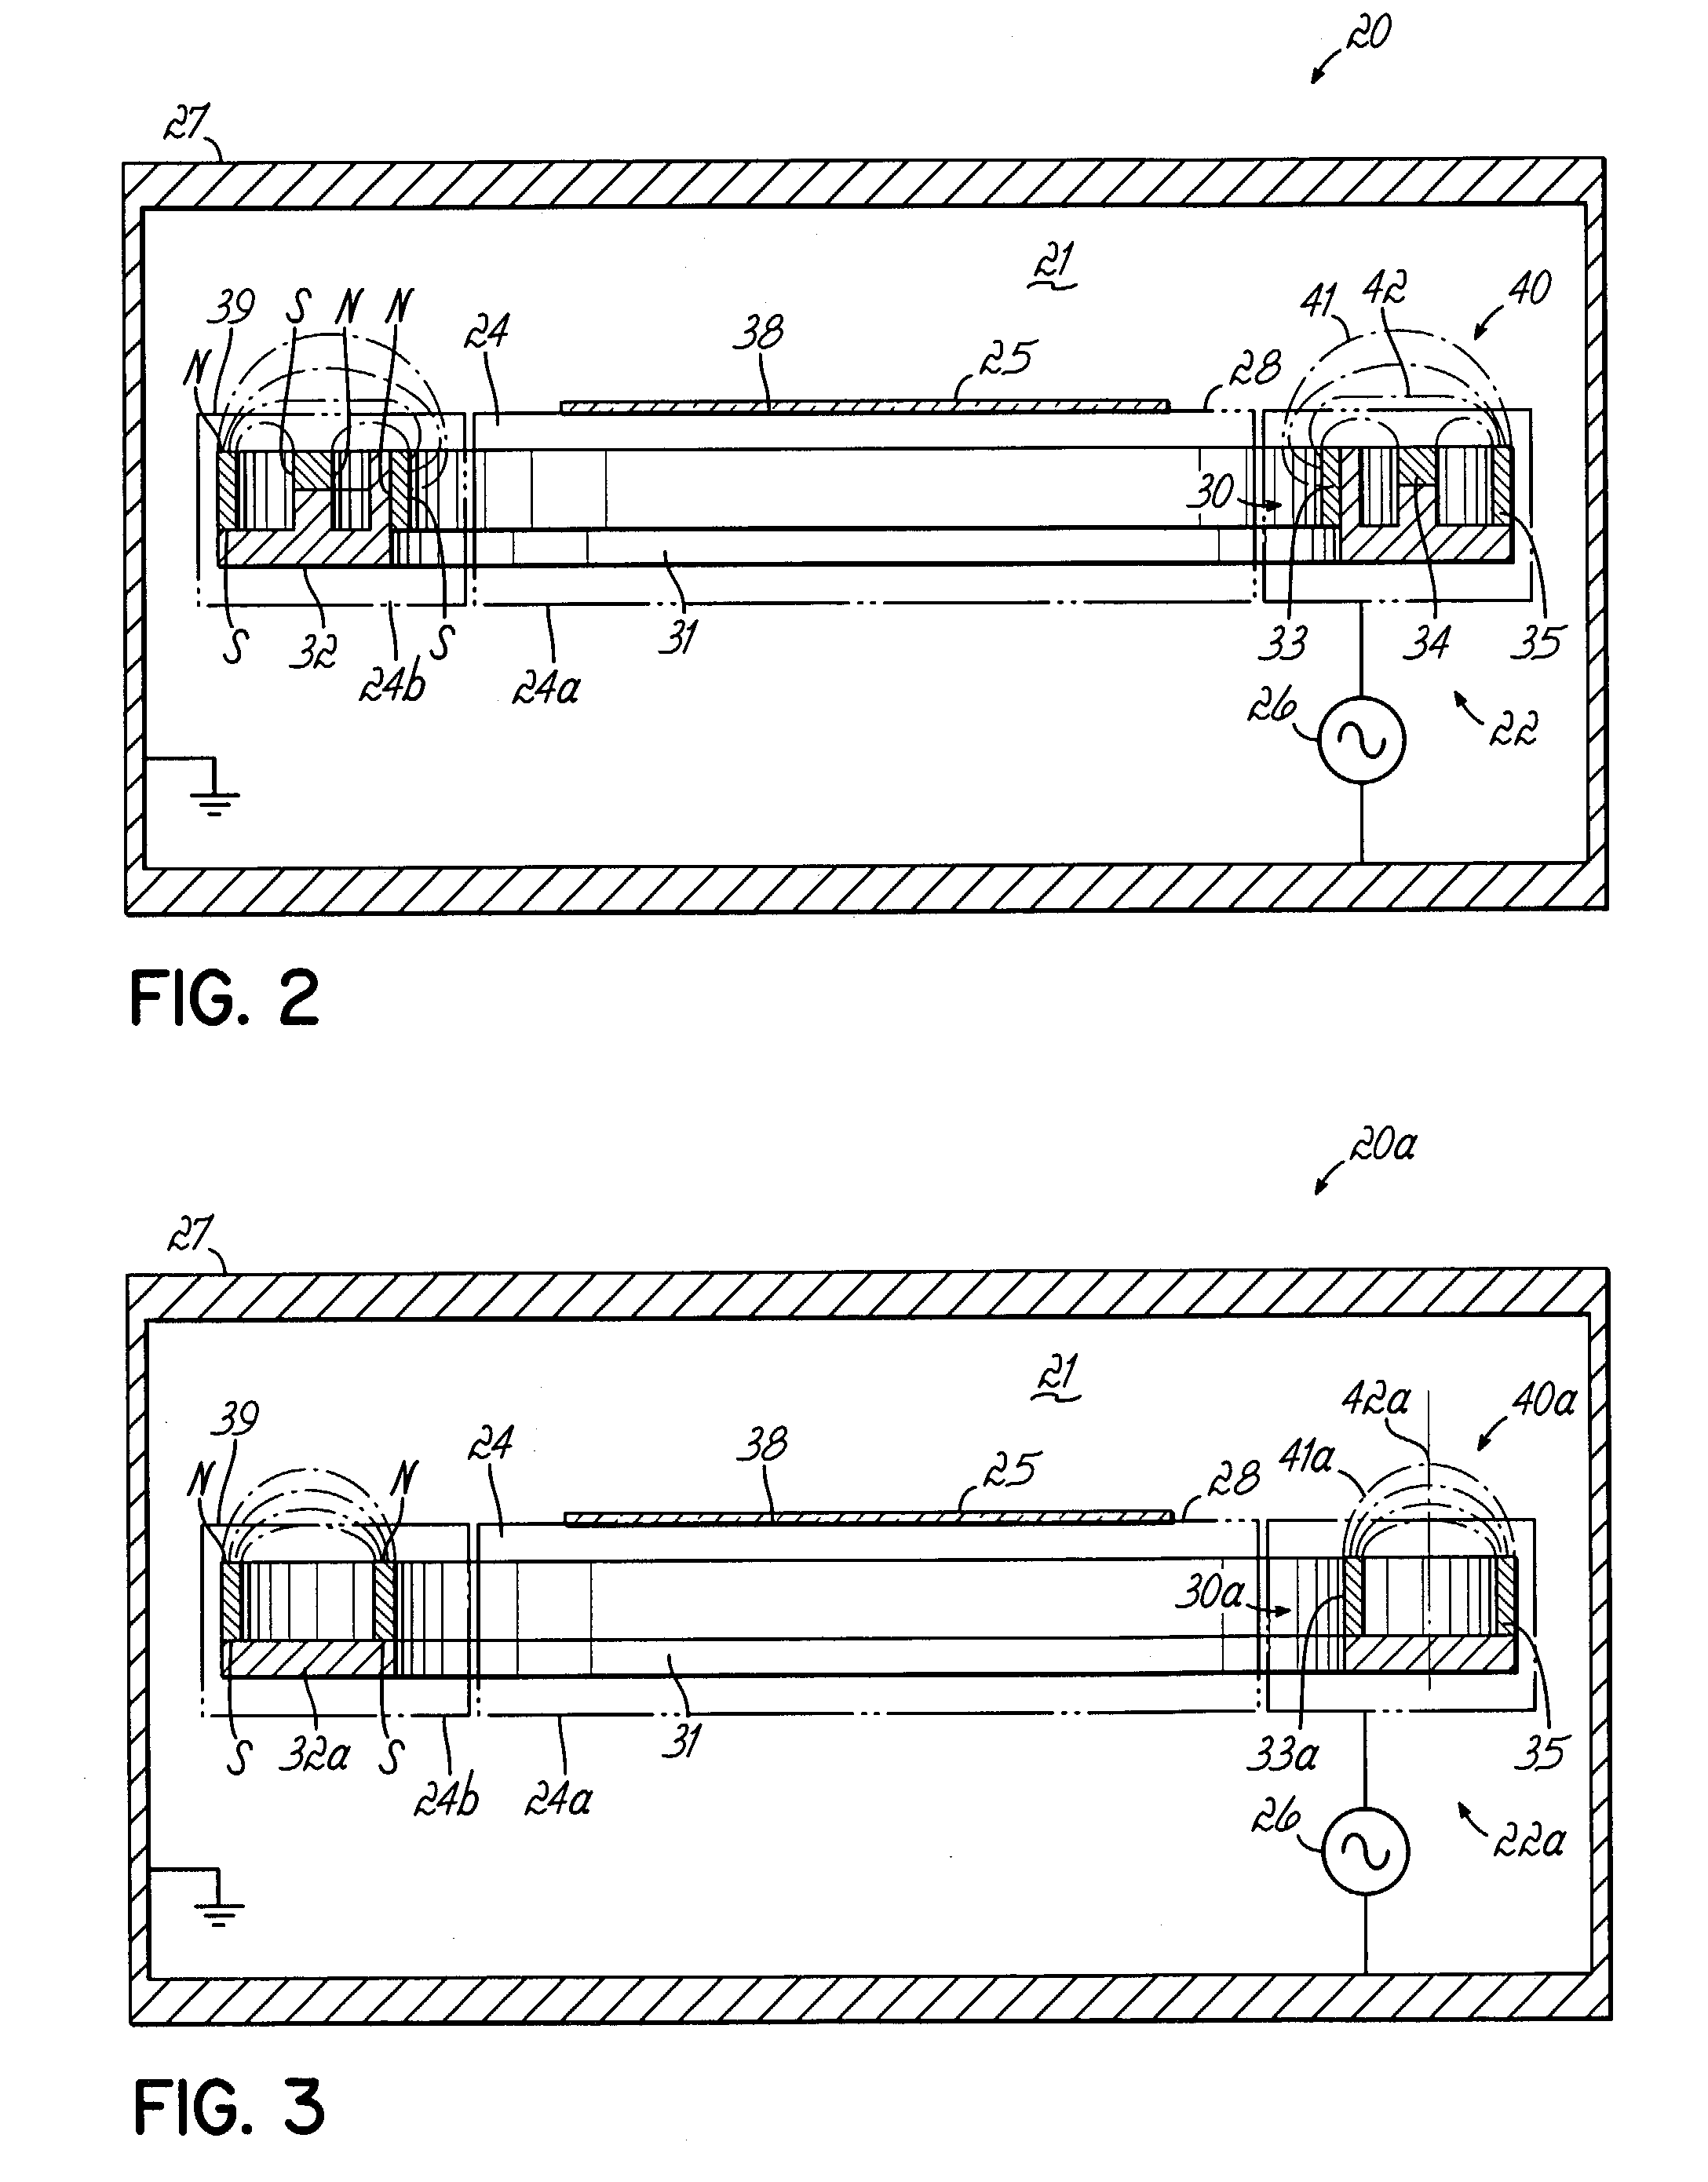 Method, apparatus and magnet assembly for enhancing and localizing a capacitively coupled plasma